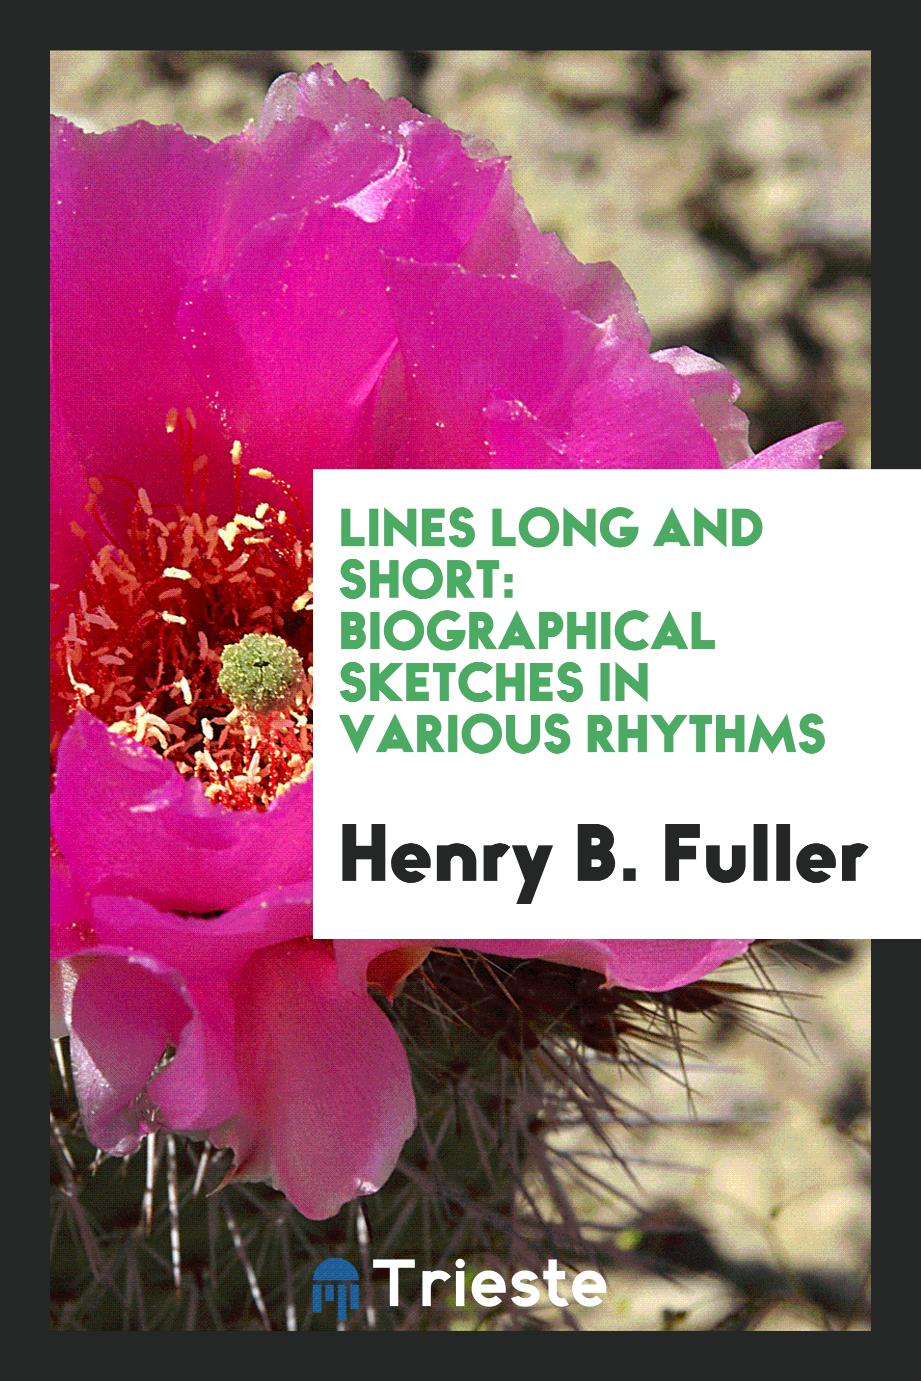 Lines Long and Short: Biographical Sketches in Various Rhythms